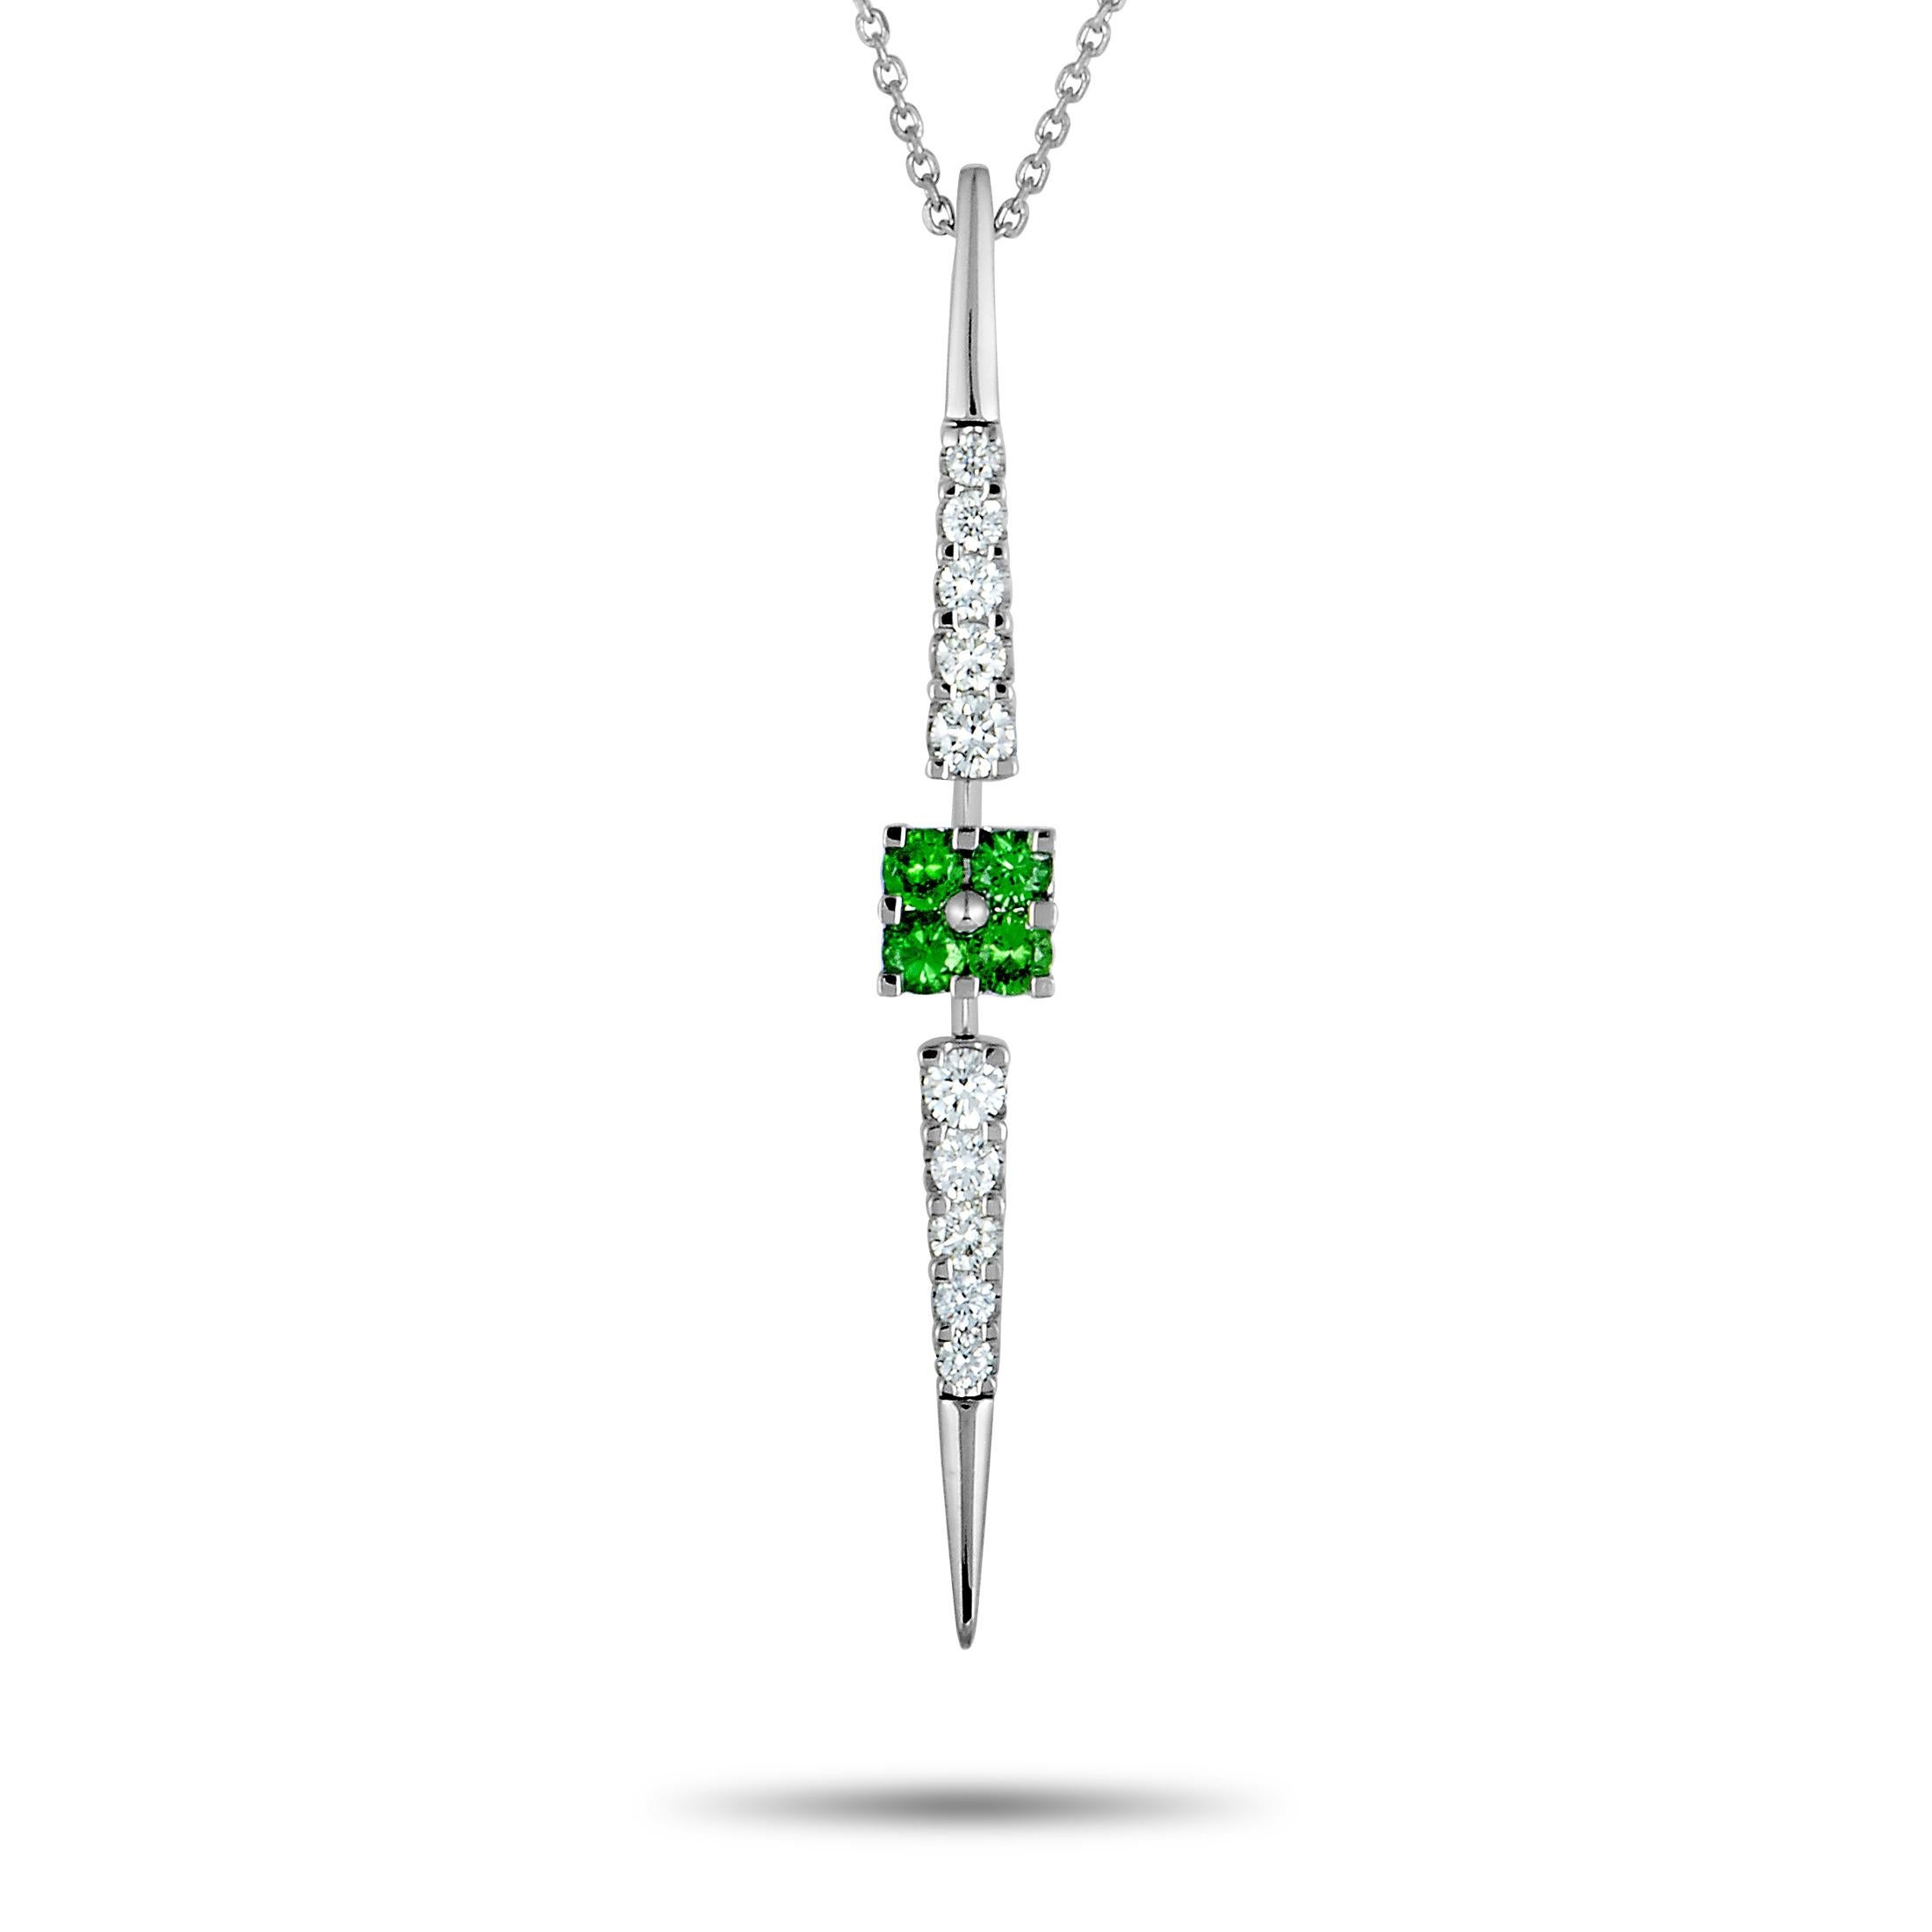 This Roberta Porrati necklace is made of 18K white gold and set with diamonds, tsavorites and pearls. The diamonds total 0.62 carats and the tsavorites amount to 0.50 carats. The necklace weighs 10.9 grams, boasting chain length of 16.00”, while the